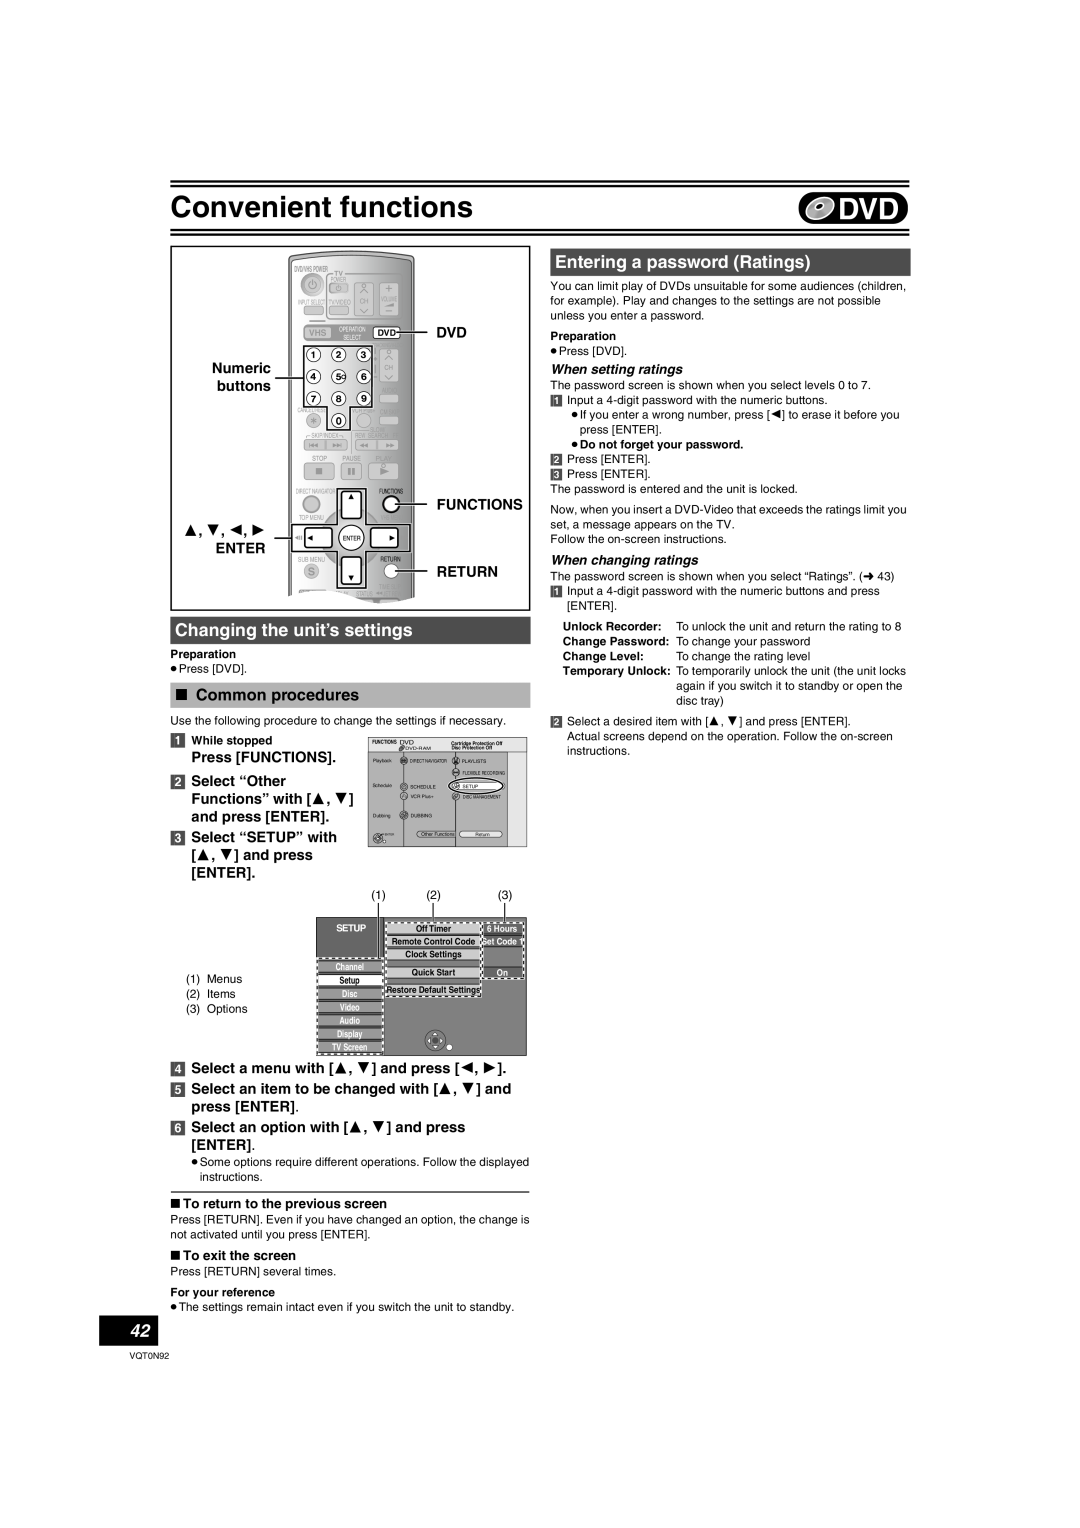 Panasonic DMR-ES30V warranty Changing the unit’s settings, Entering a password Ratings, Select a menu with 3, 4 and press 2 